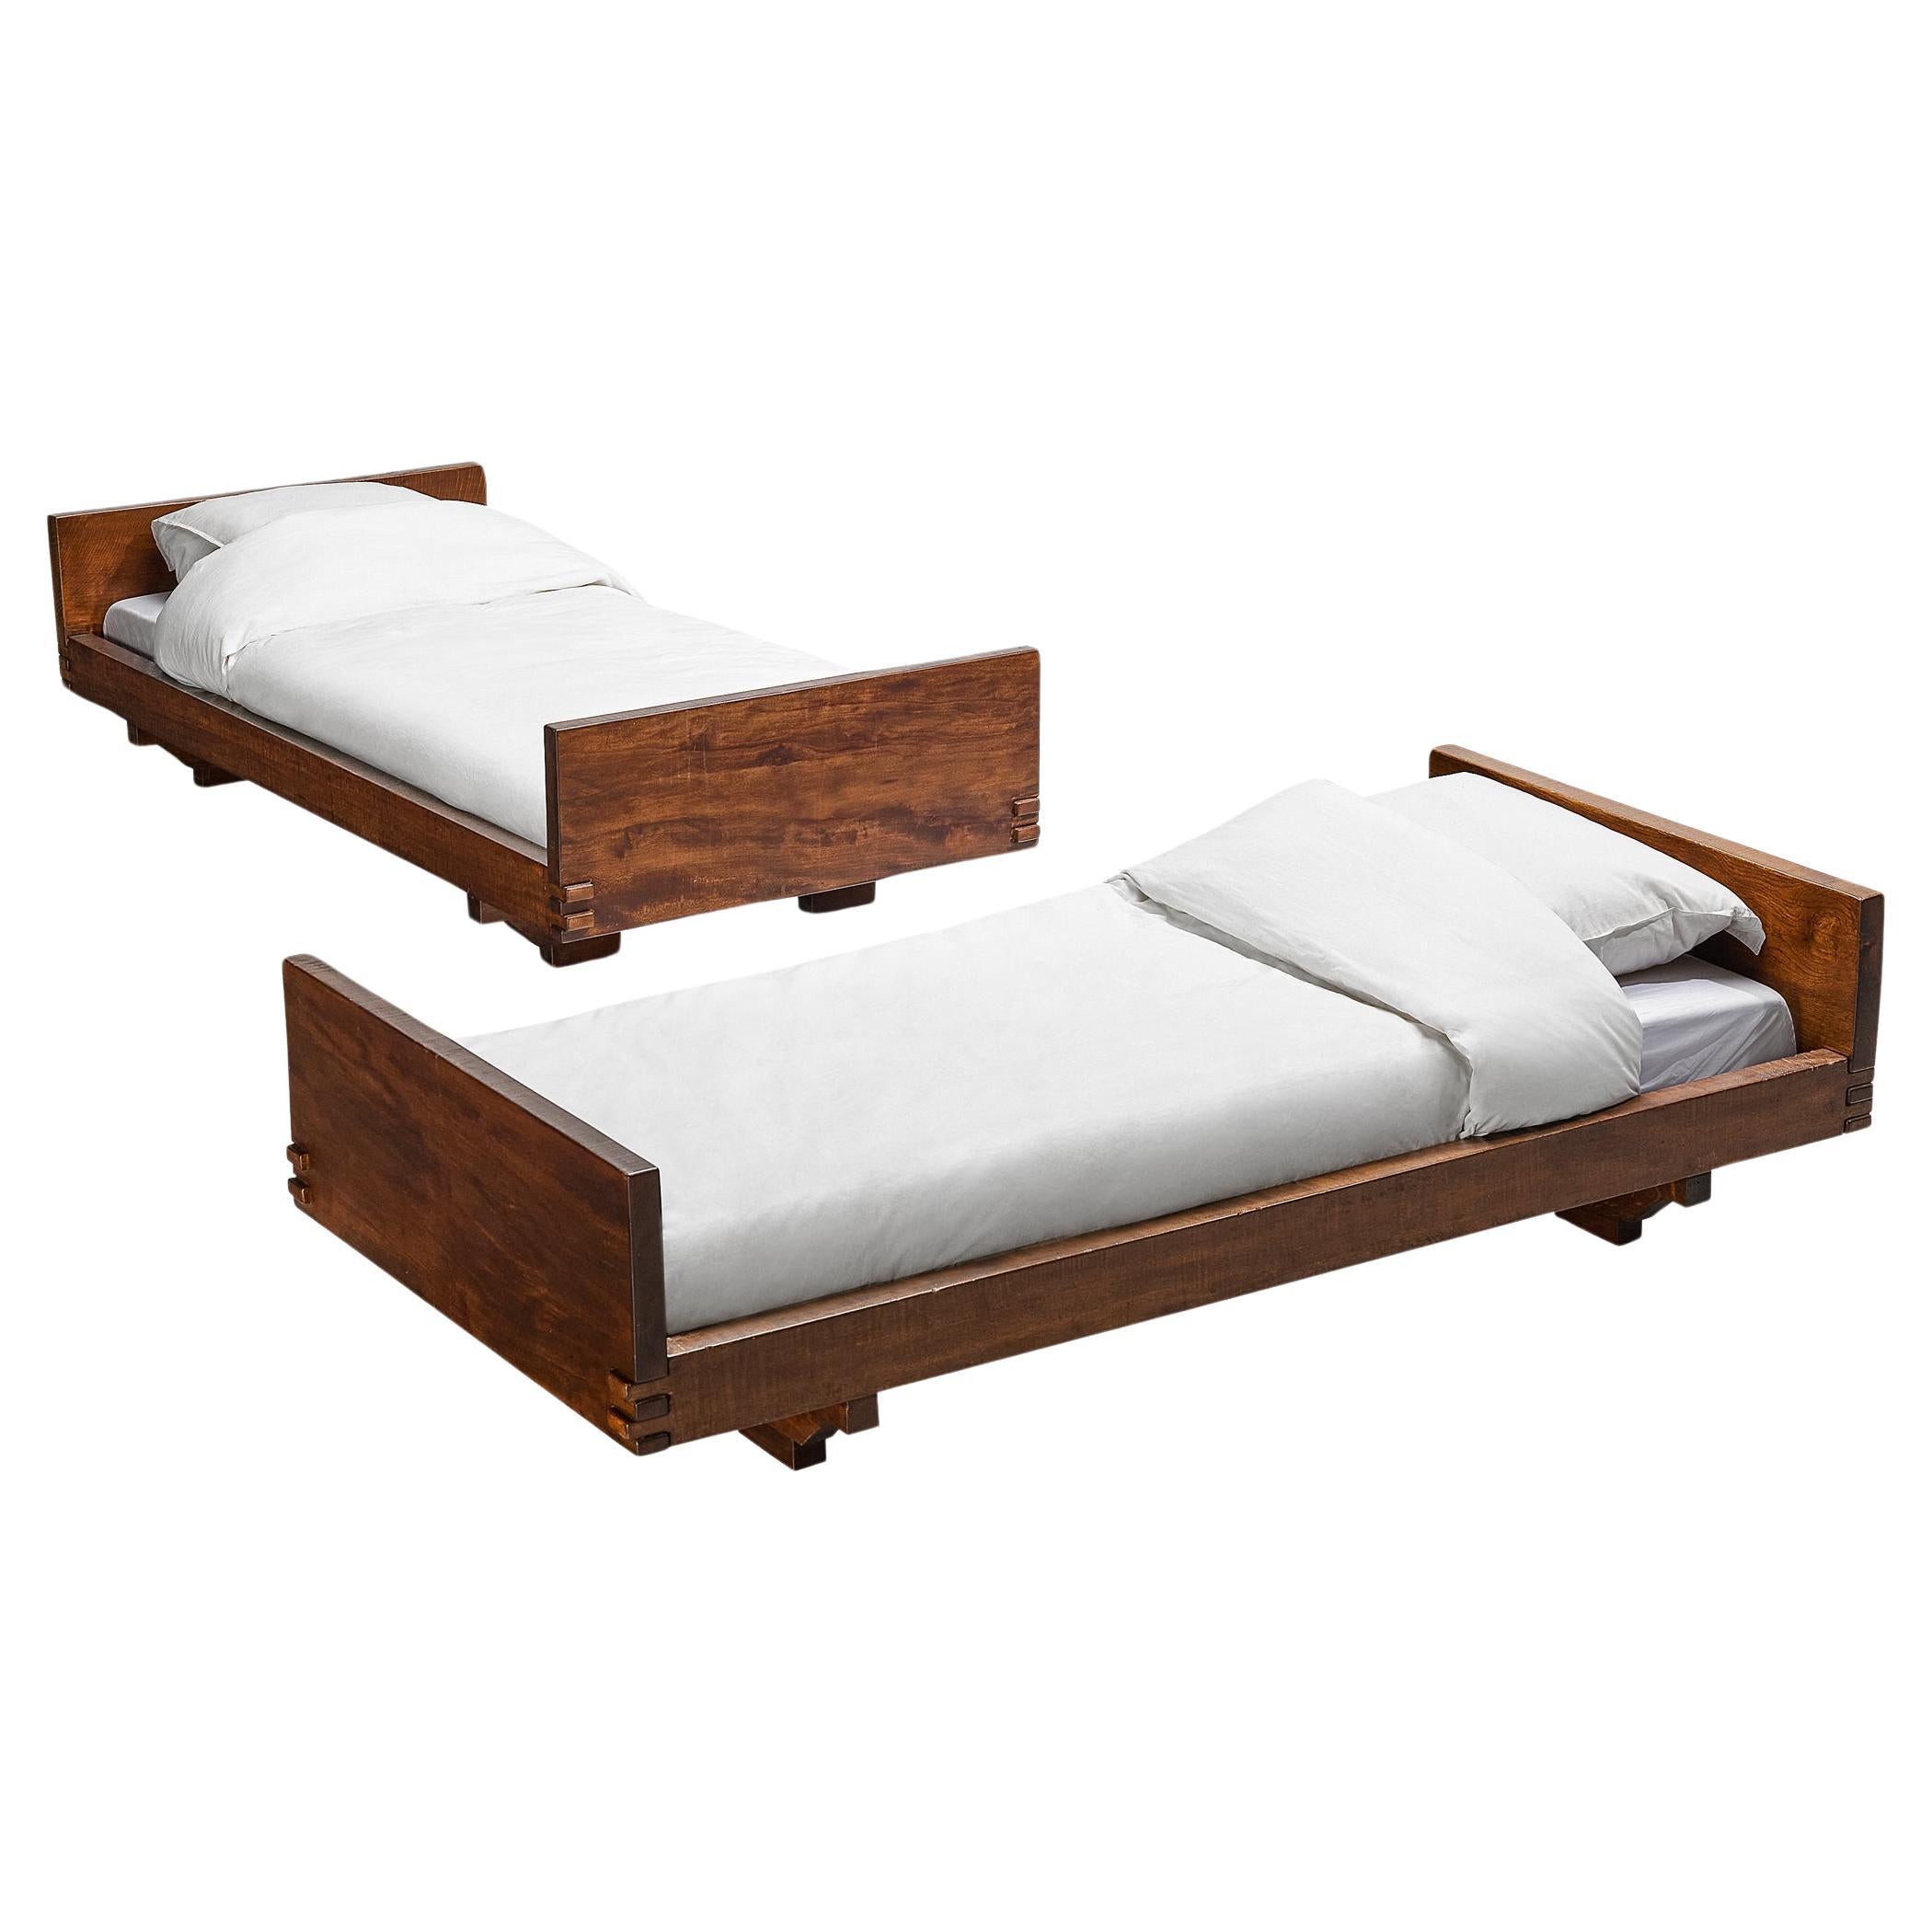 Giuseppe Rivadossi for Officina Rivadossi Single Beds in Walnut and Oak 